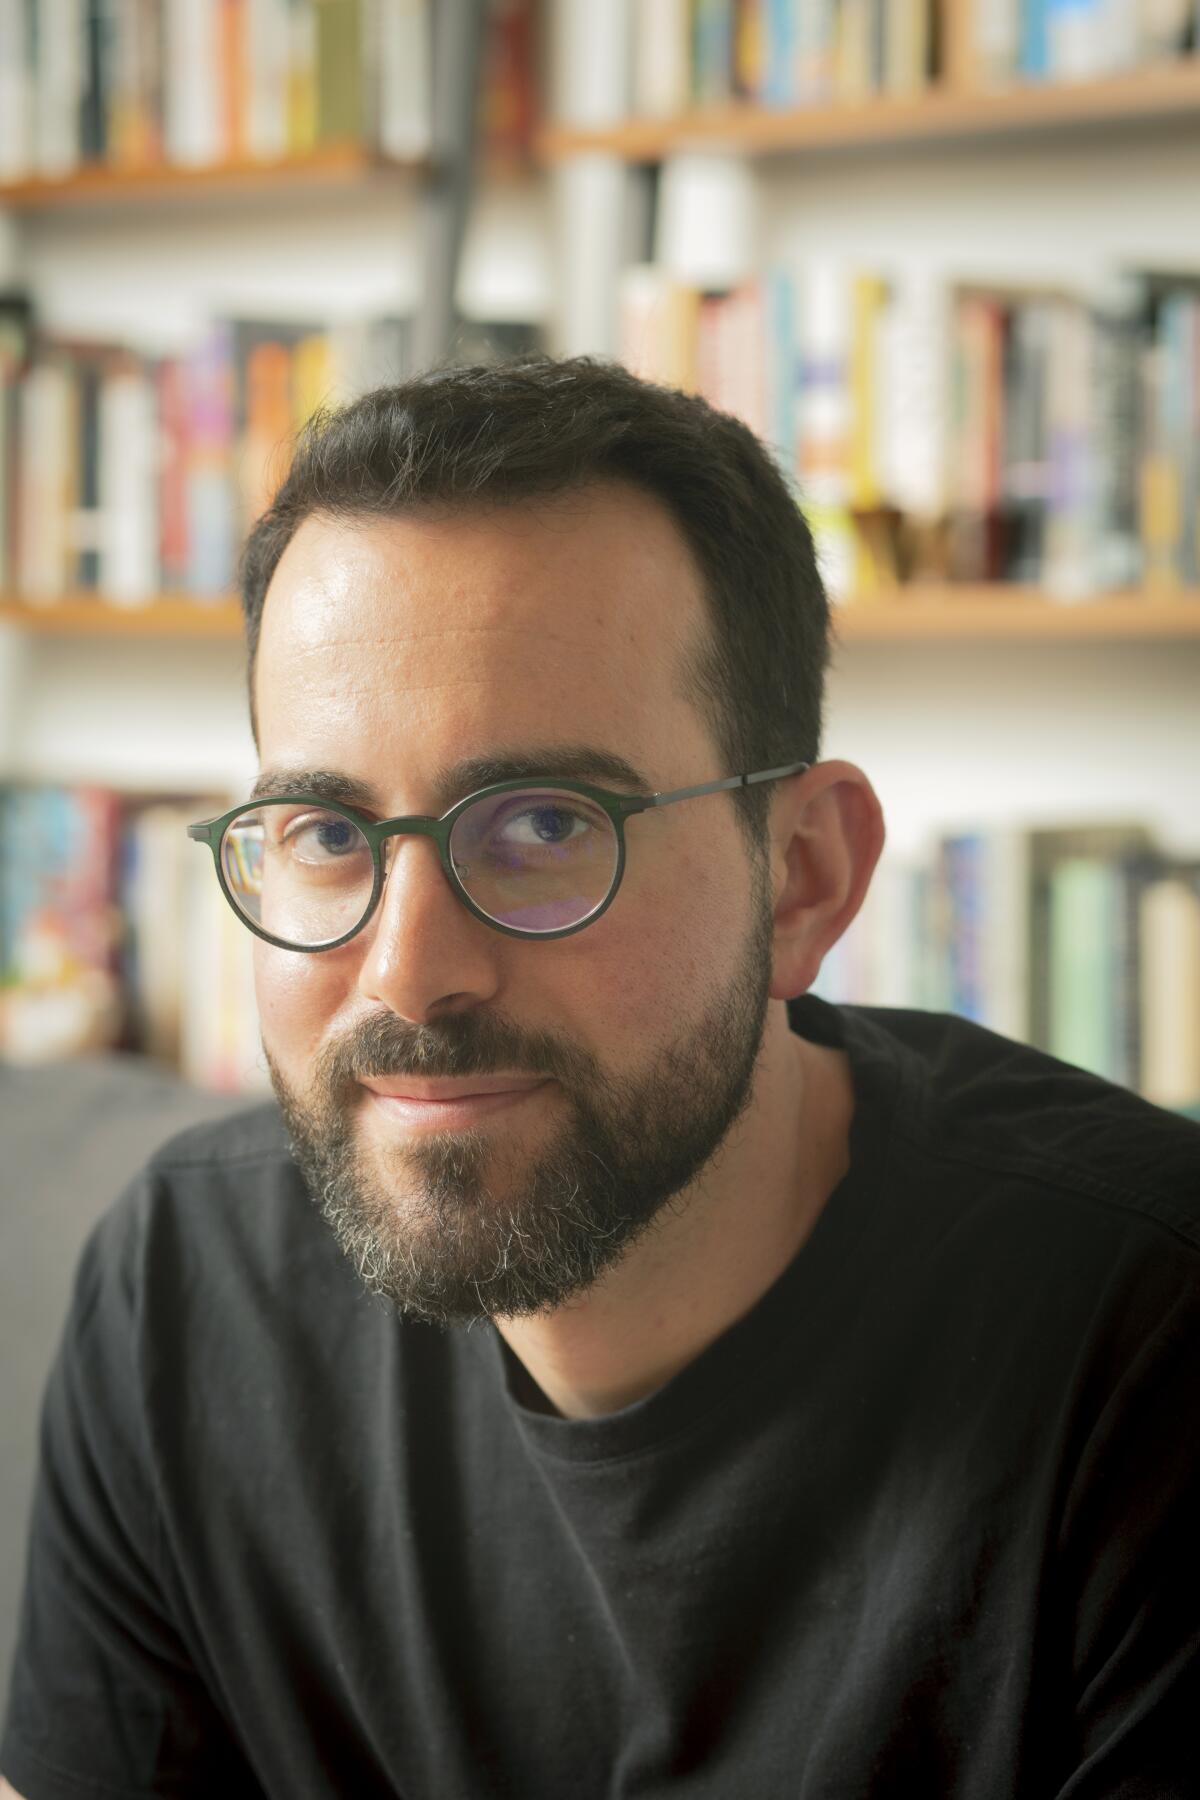 A bearded man wearing a dark crewneck shirt and glasses sits before shelves filled with books.